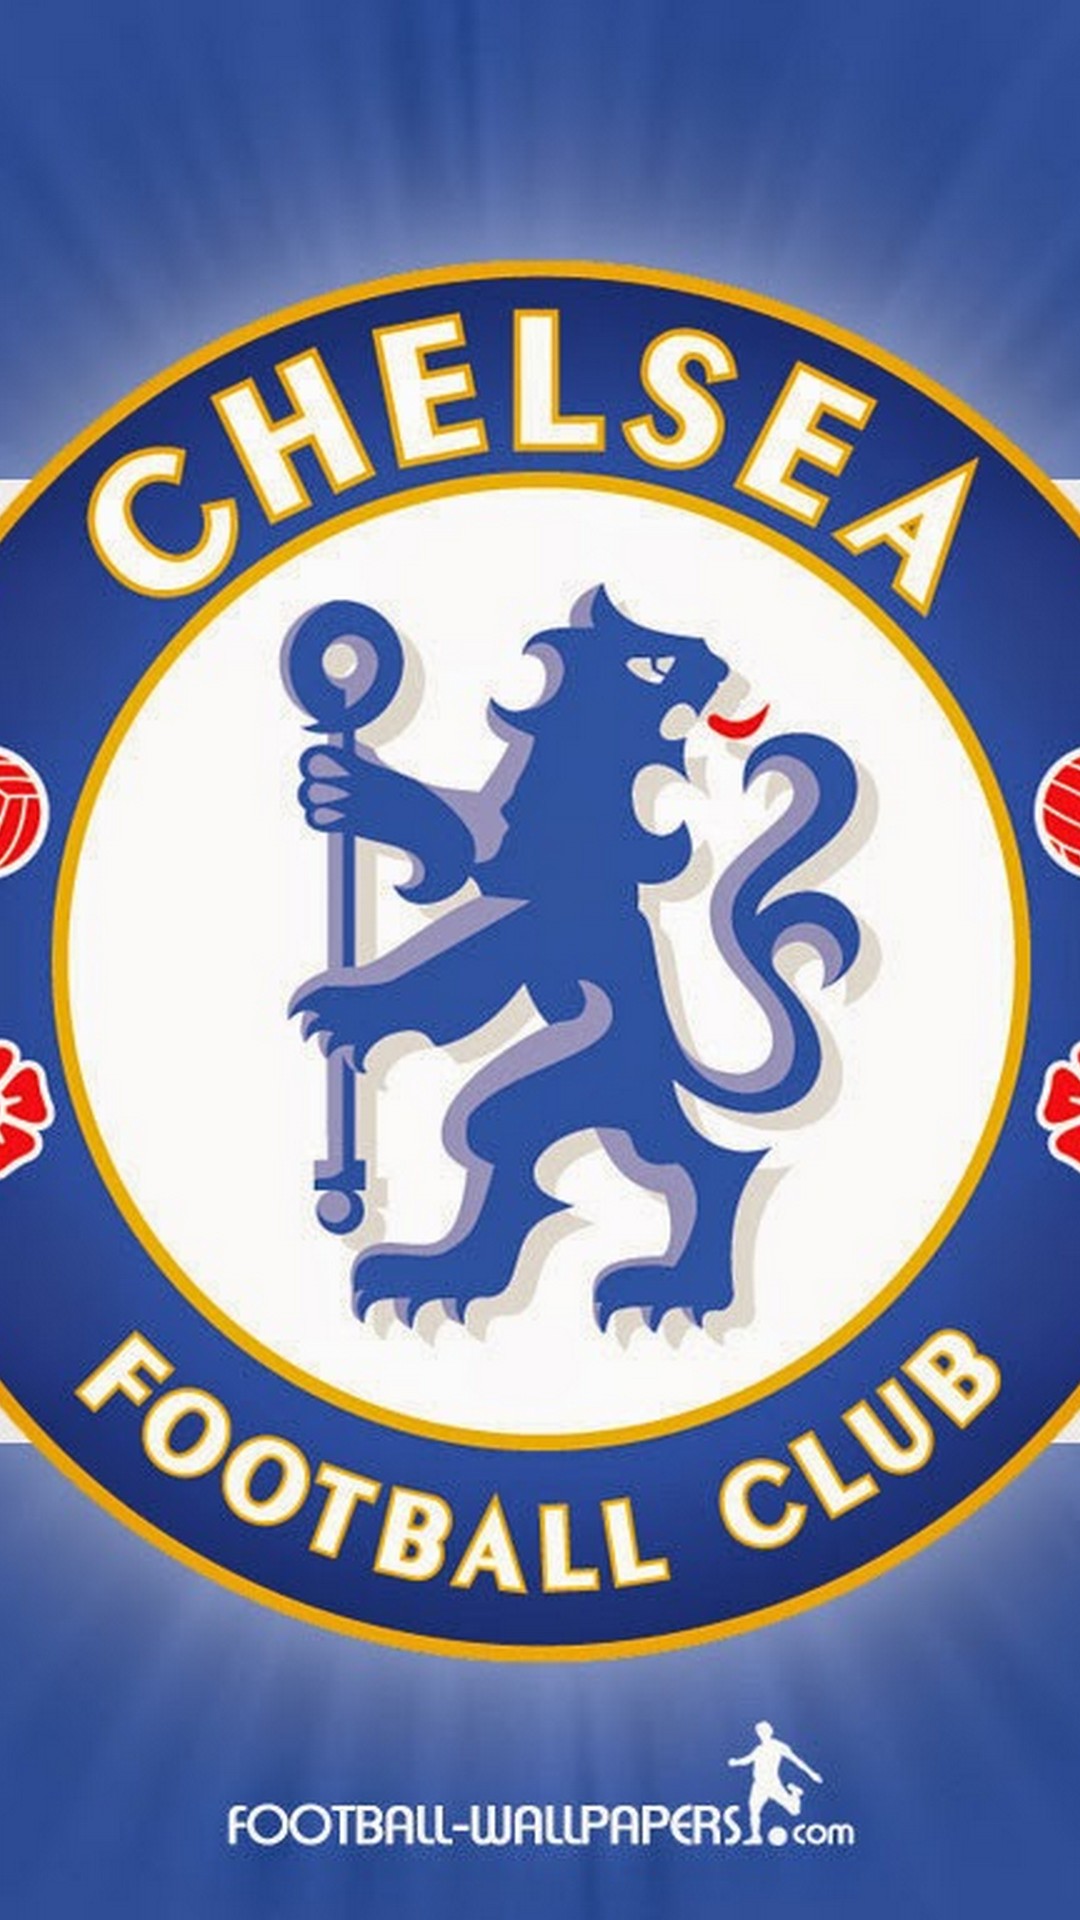 Chelsea Football Club iPhone X Wallpaper With Resolution 1080X1920 pixel. You can make this wallpaper for your Mac or Windows Desktop Background, iPhone, Android or Tablet and another Smartphone device for free